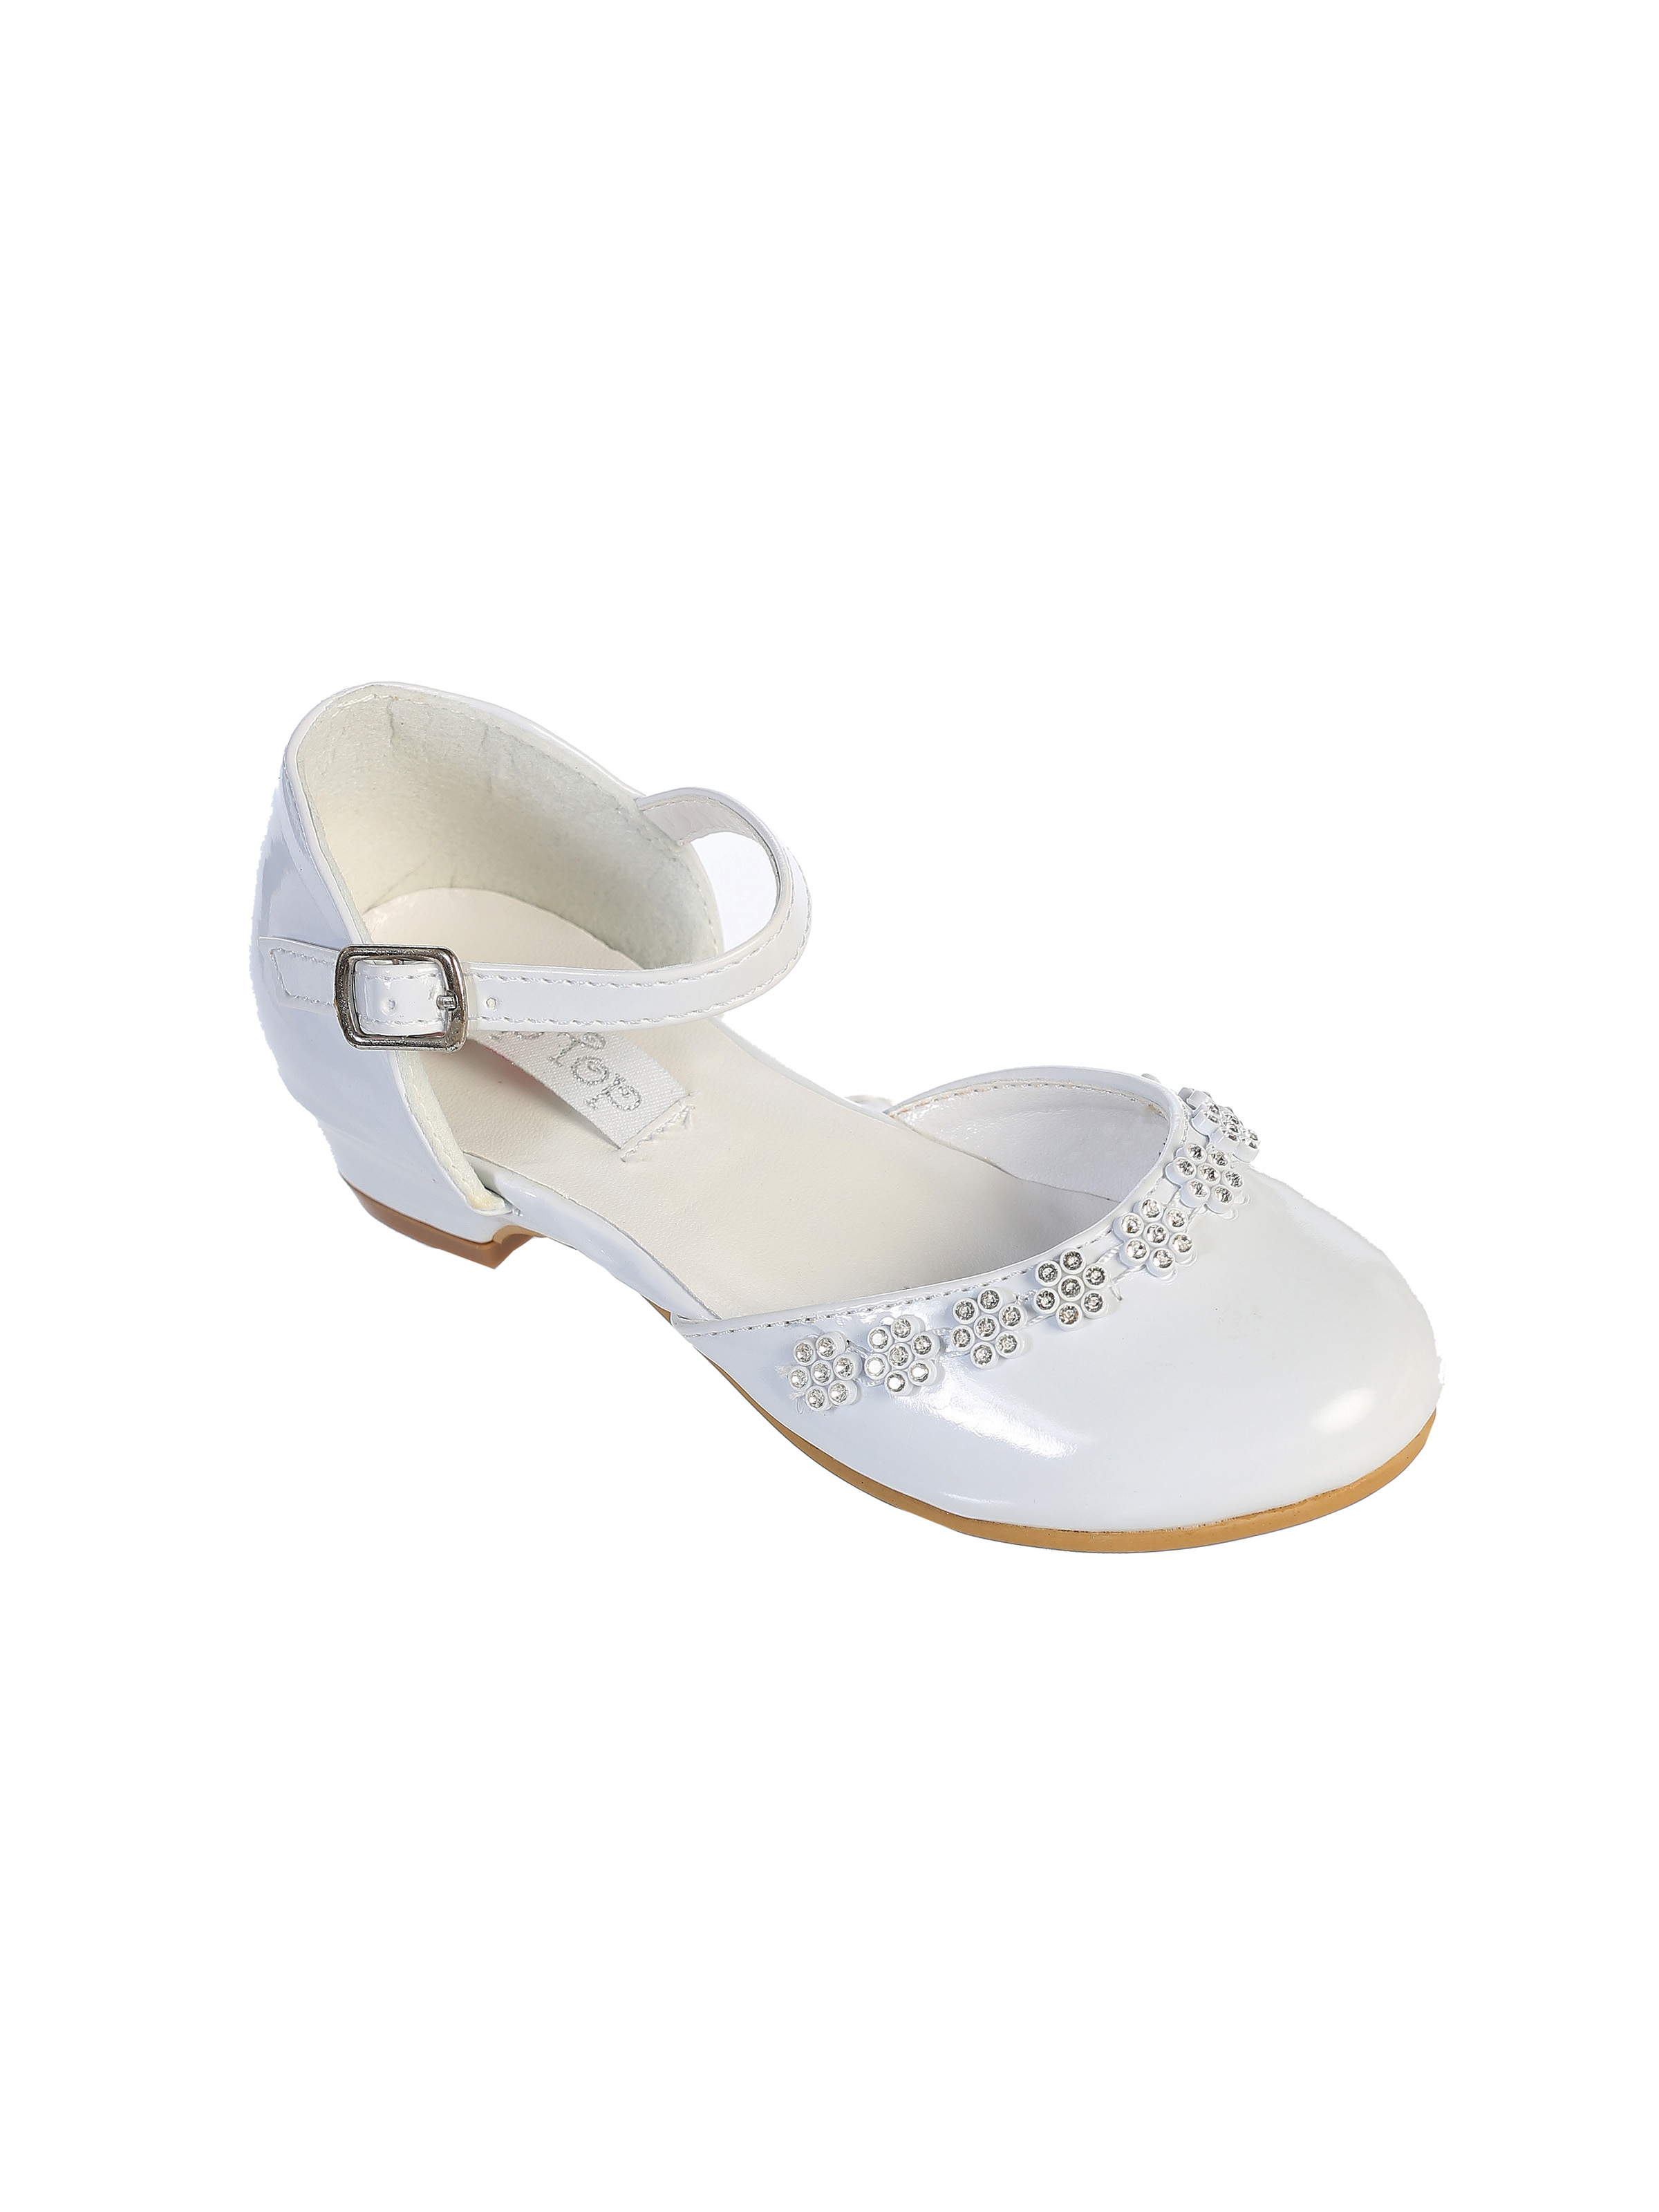 Flower Girl Shoe Style S69 - Soft Patent Shoe with Floral Rhinestone Detailing